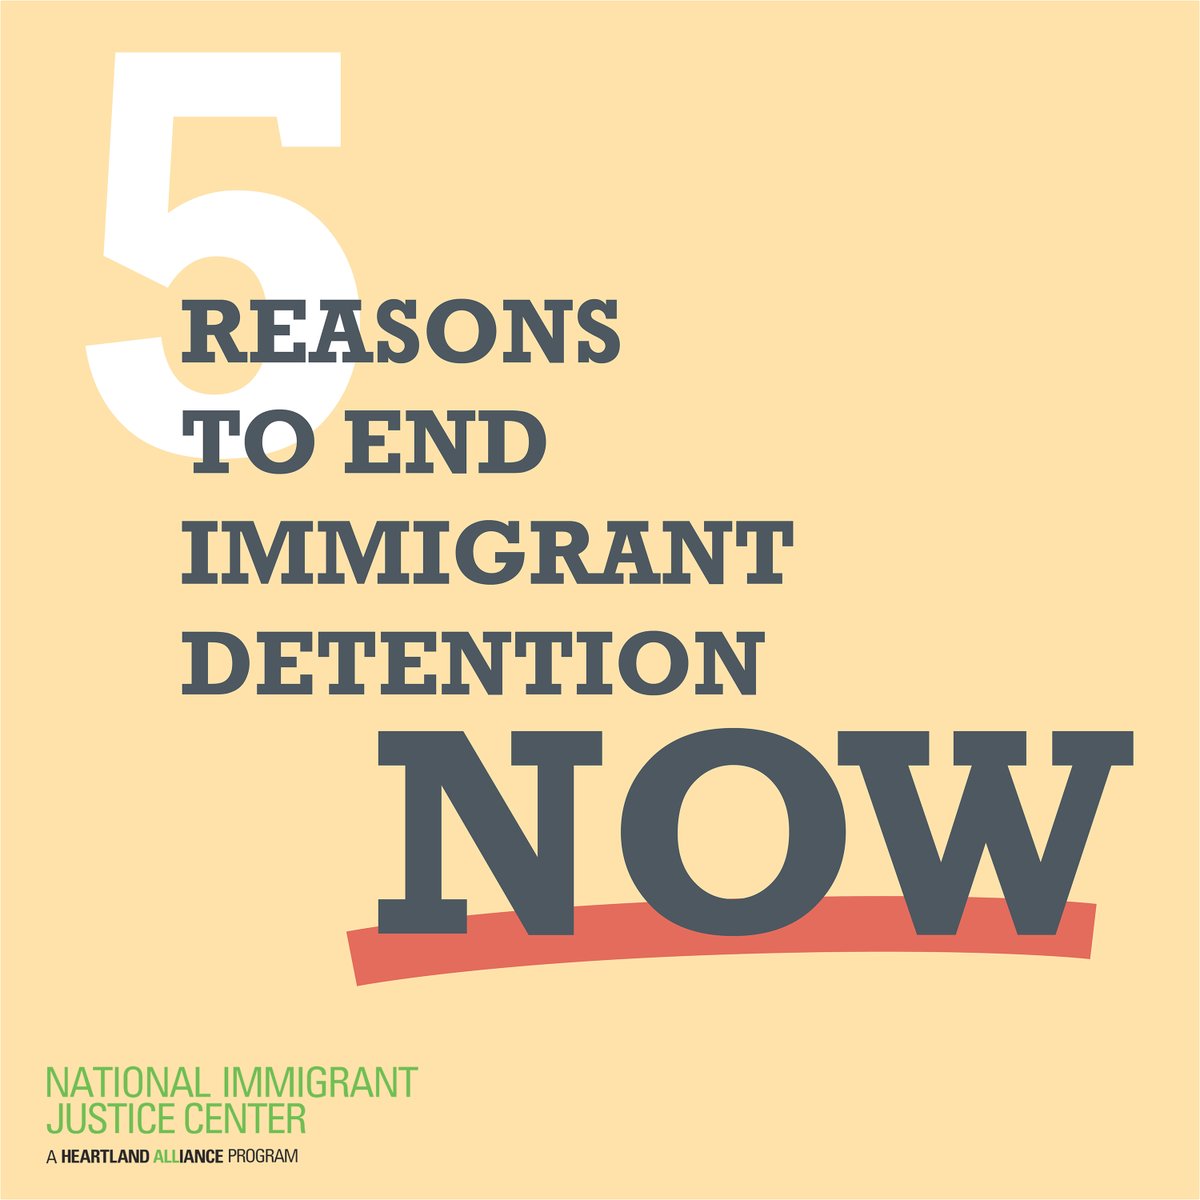 We call on policy makers and elected officials to take immediate and dramatic steps toward ending immigration detention. Here are 5 reasons why: